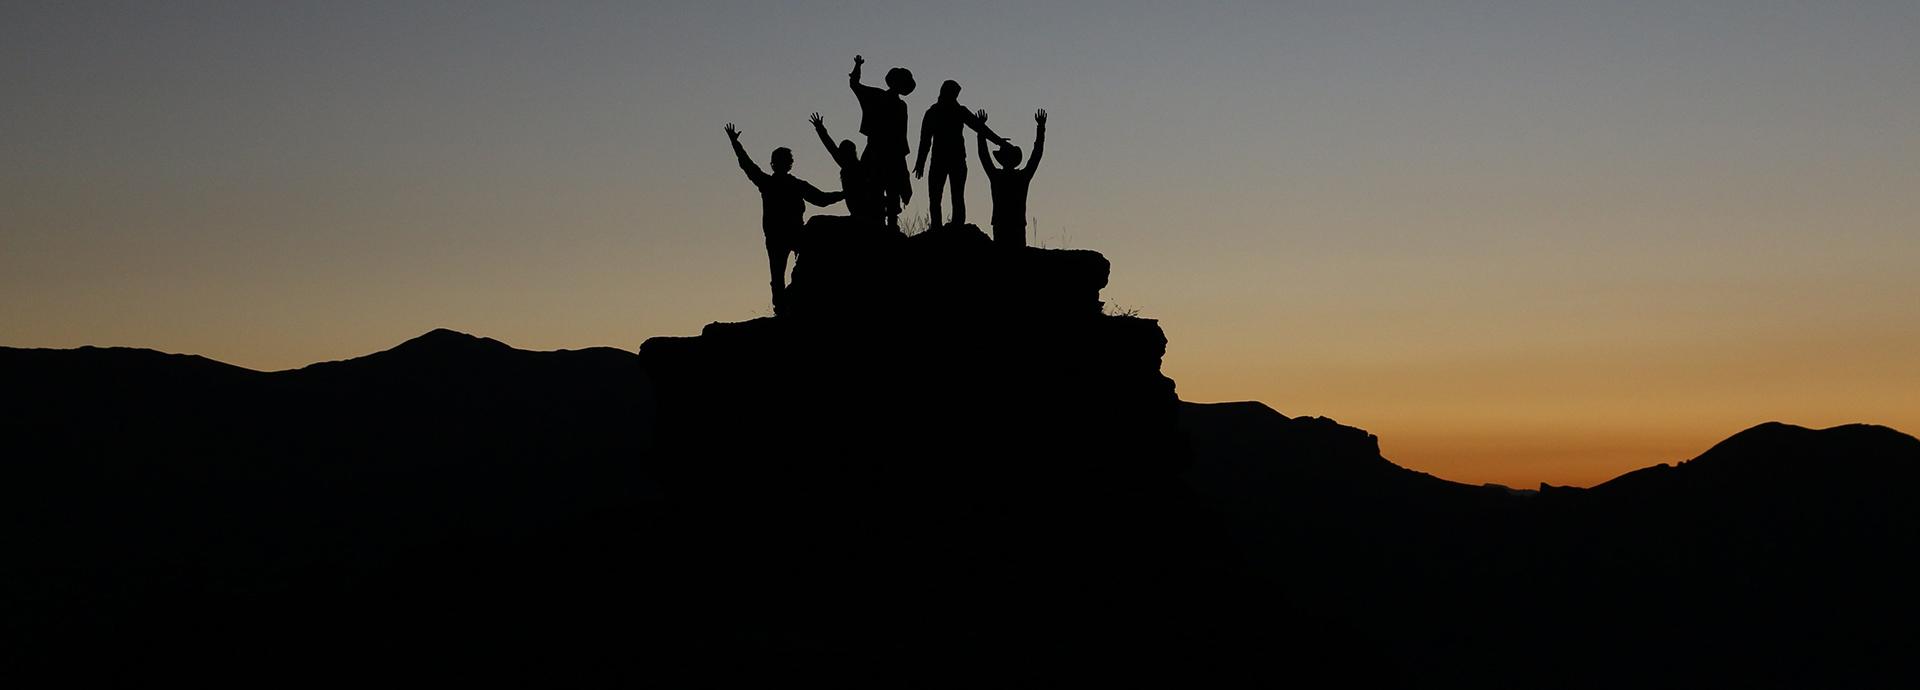 Silhouette of group of five people on a mountain during a sunset. The people have their hands up.